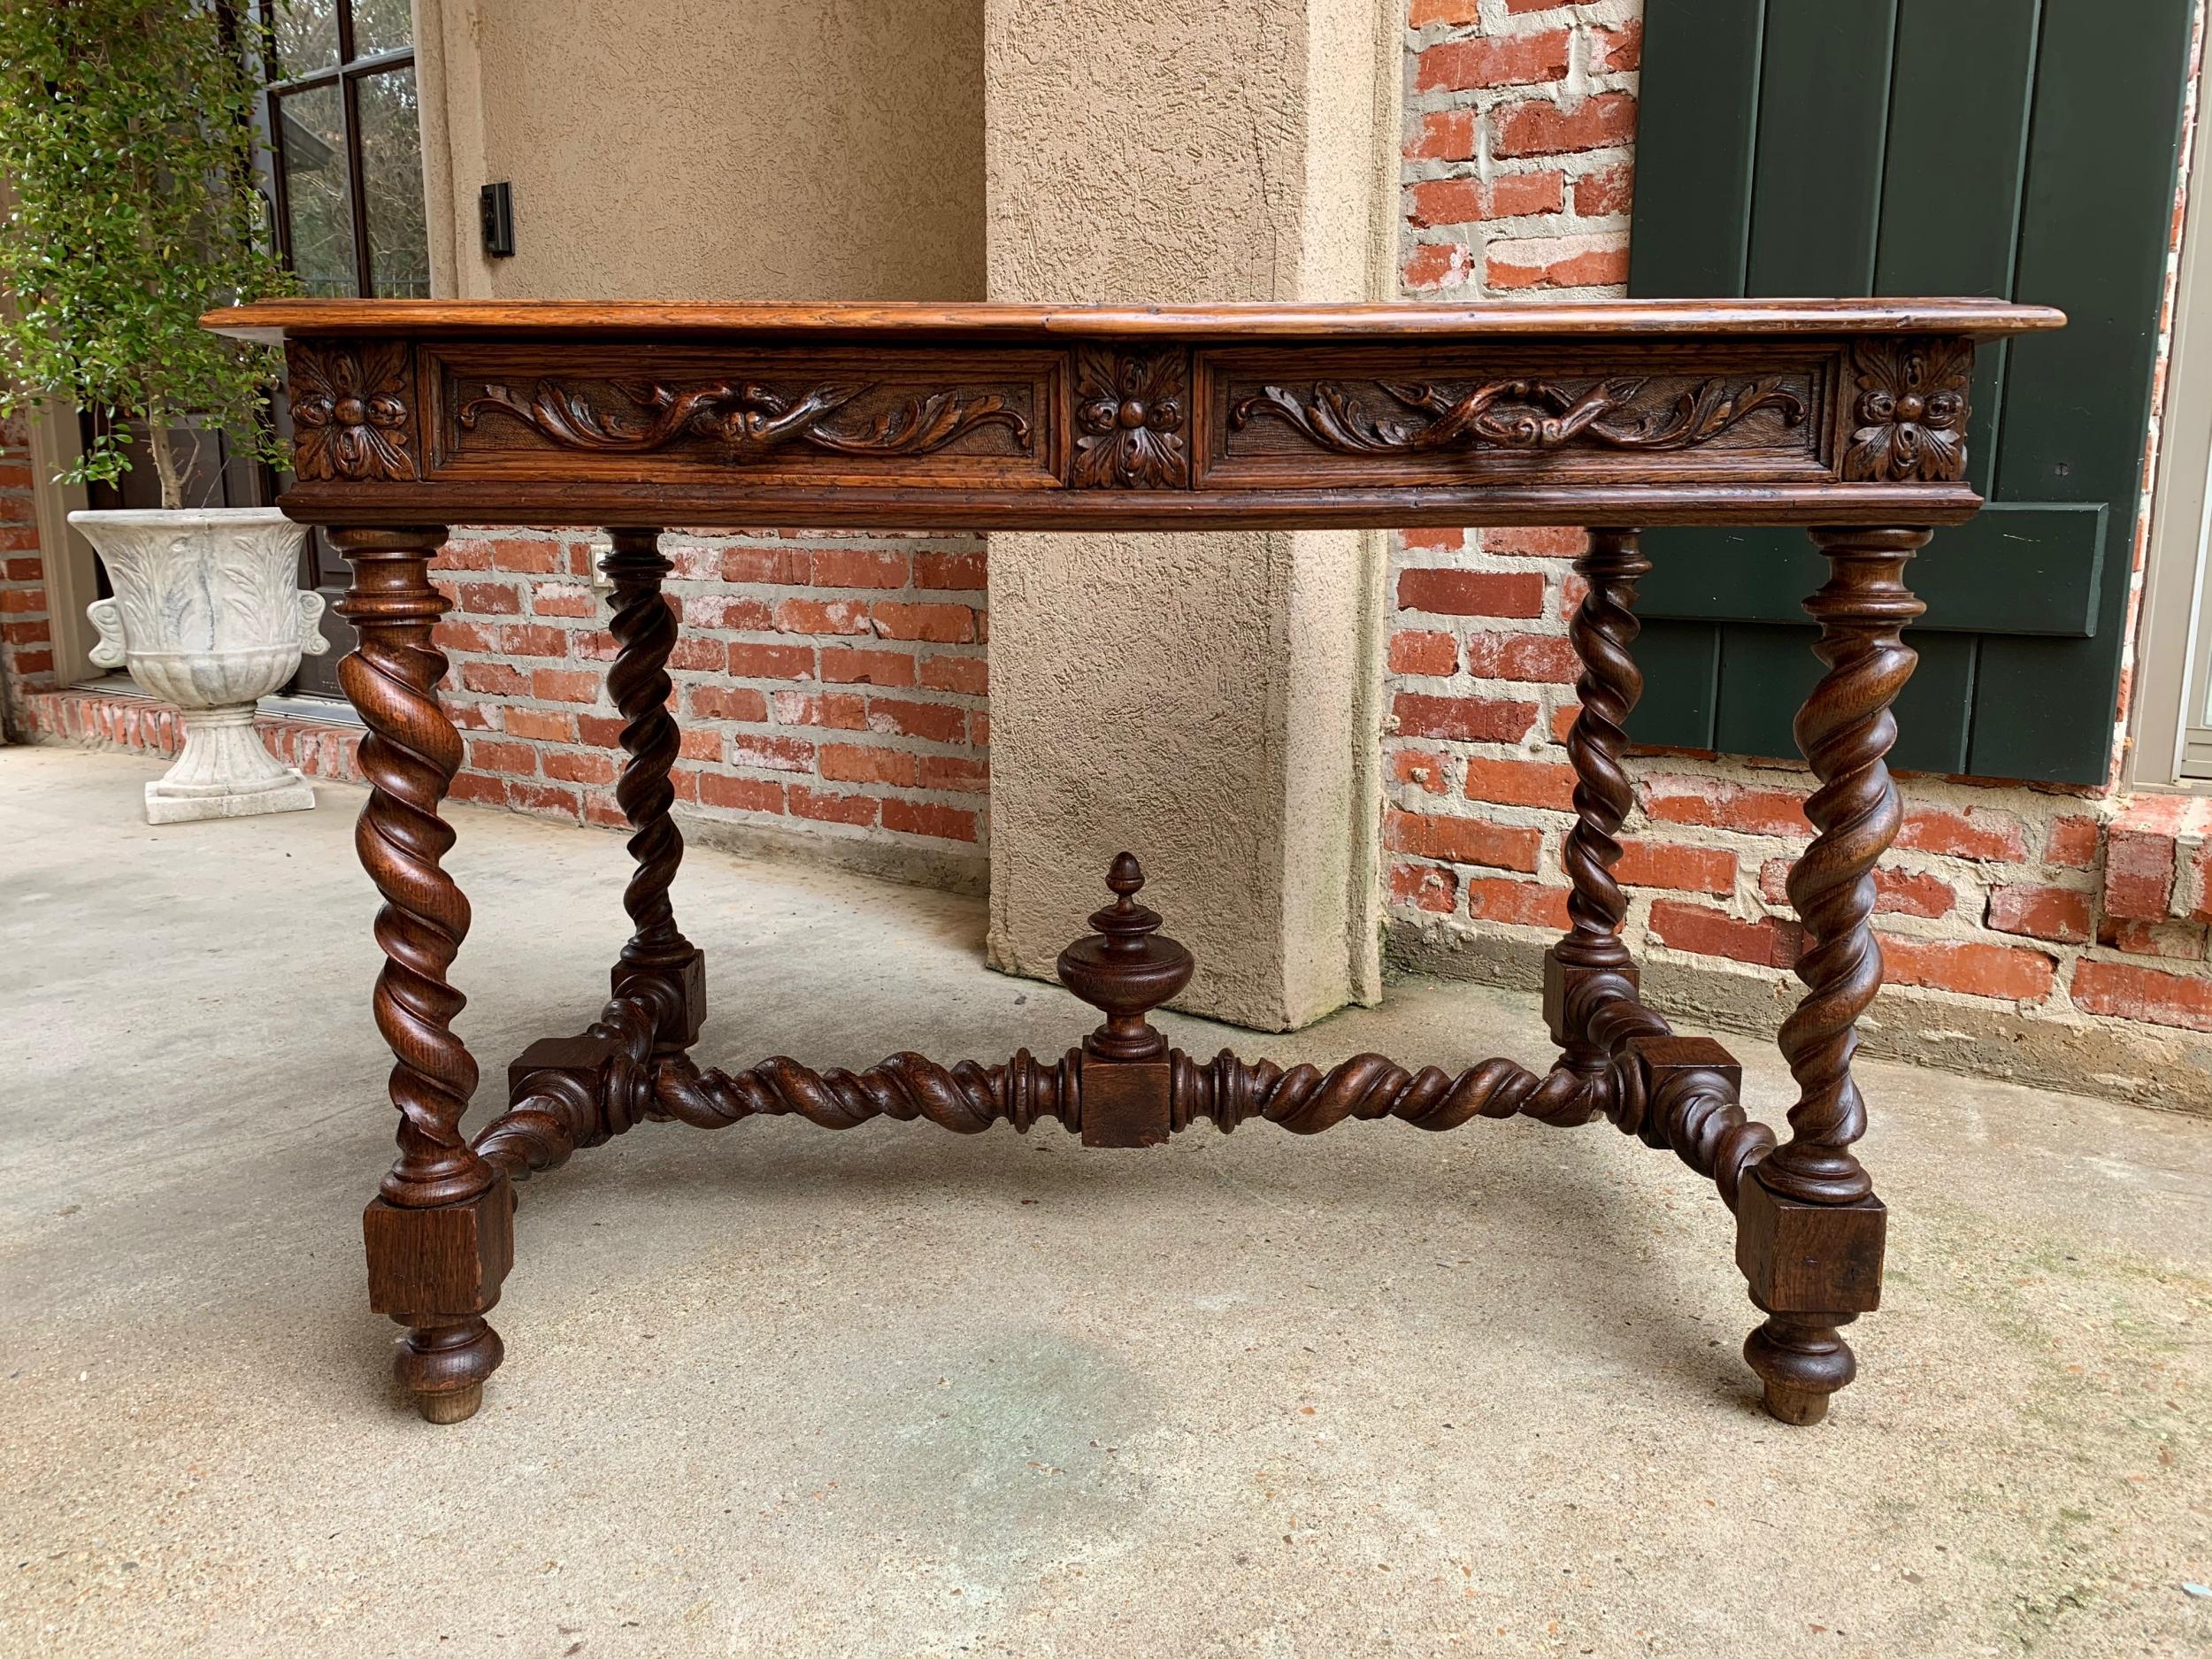 19th century French carved oak sofa table writing desk barley twist black forest

~Direct from France~
~Beautiful French writing desk or sofa table with elegant features~
~Front frieze features two large drawers with Black Forest style open